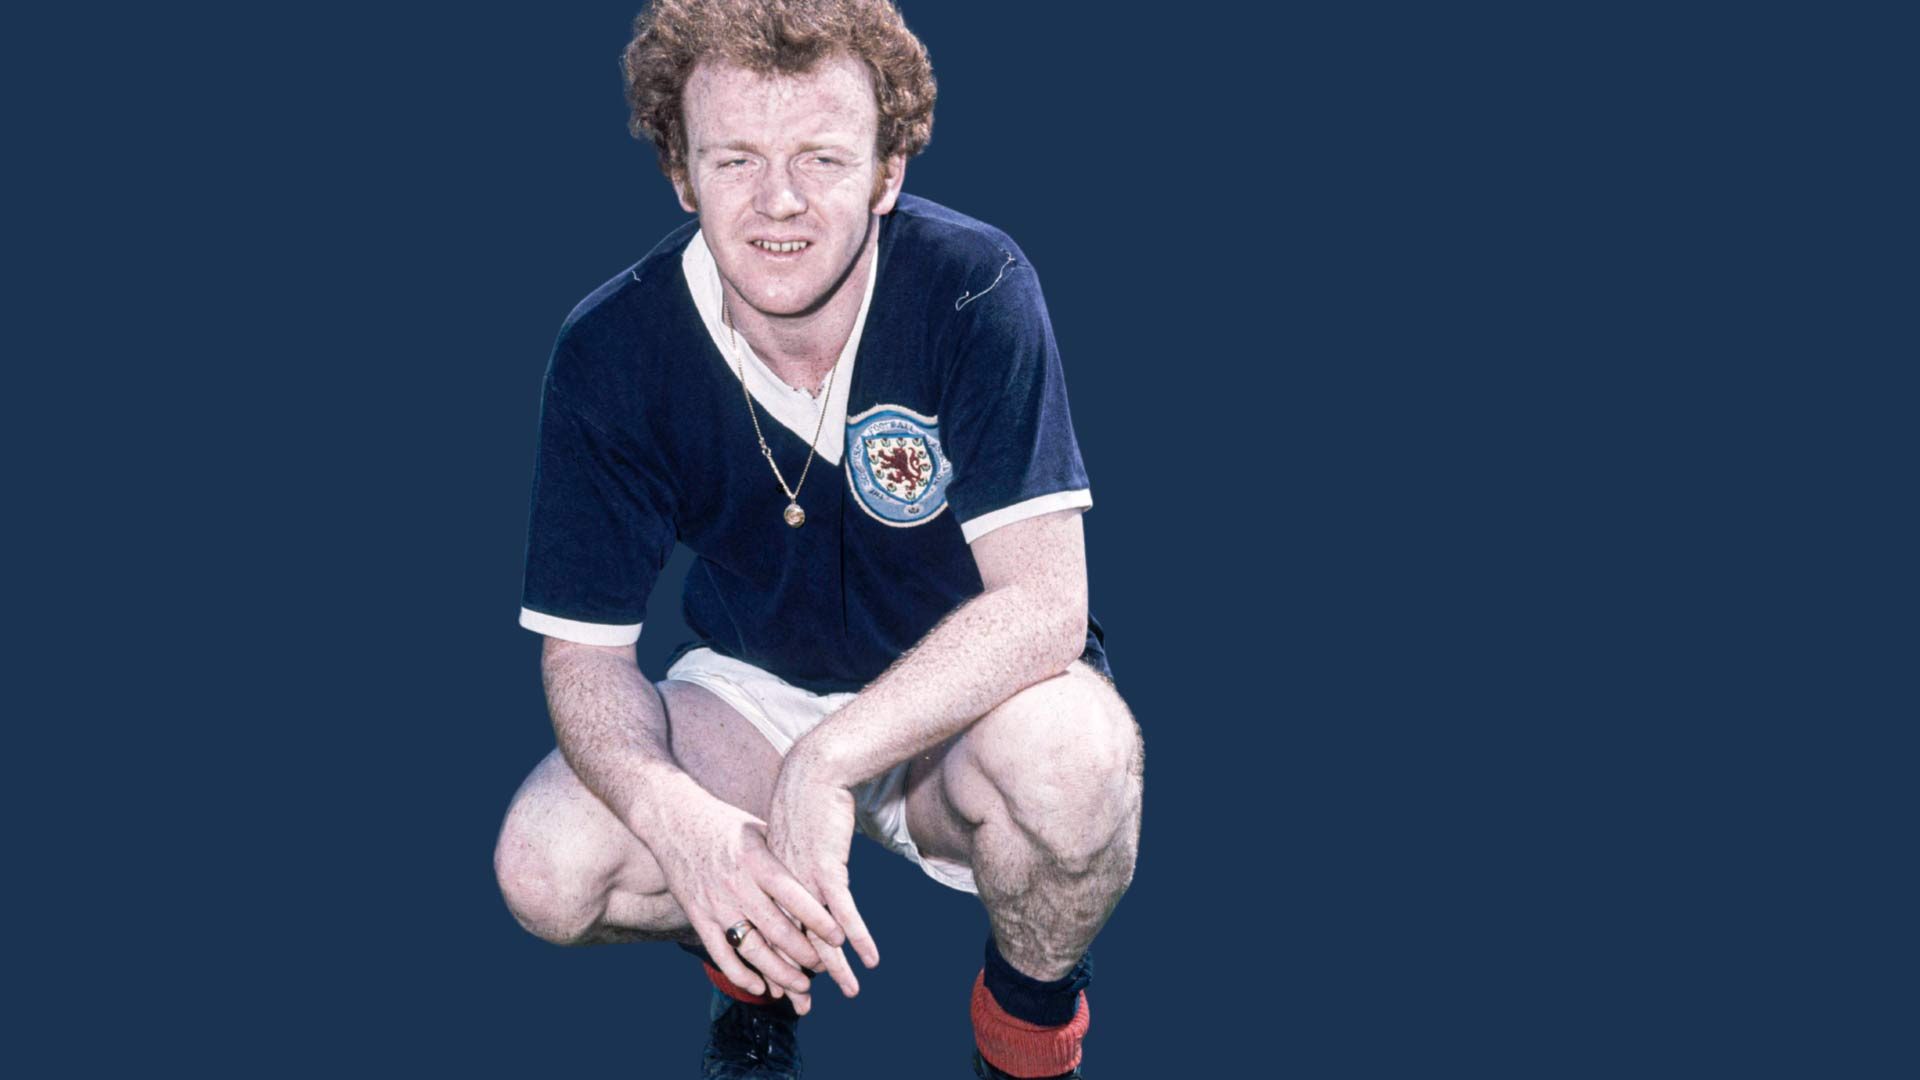 Billy Bremner kneeling down in a Scotland kit, necklace hanging out, looking absolutely haggard